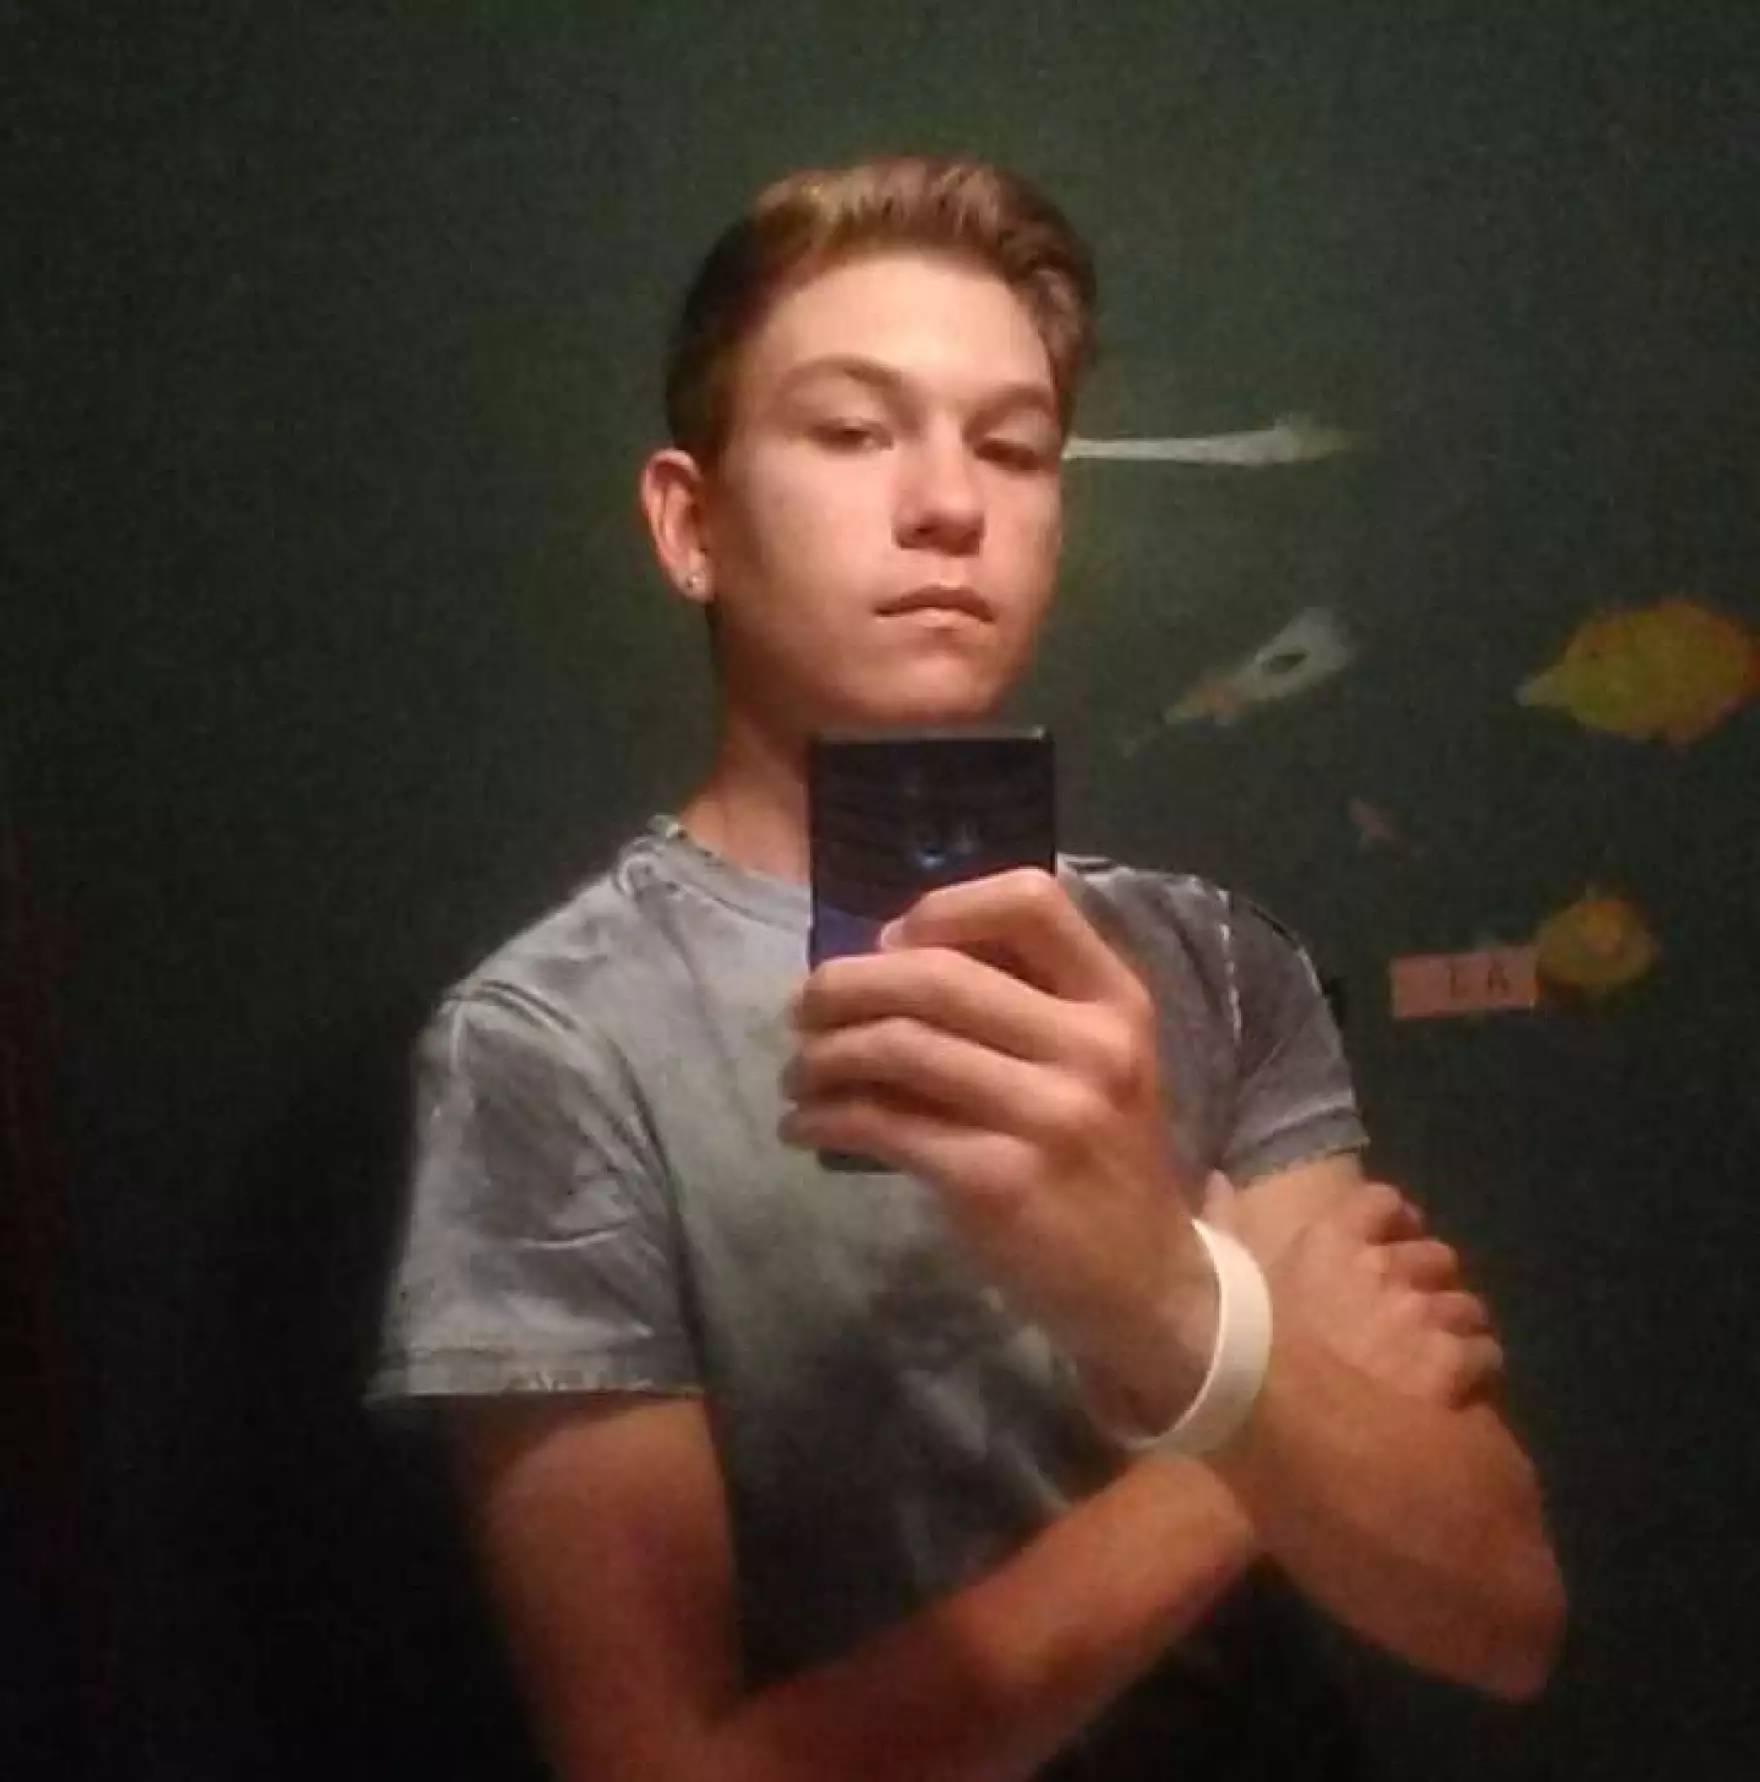 AJ Iverson poses for a mirror selfie taken before his death.